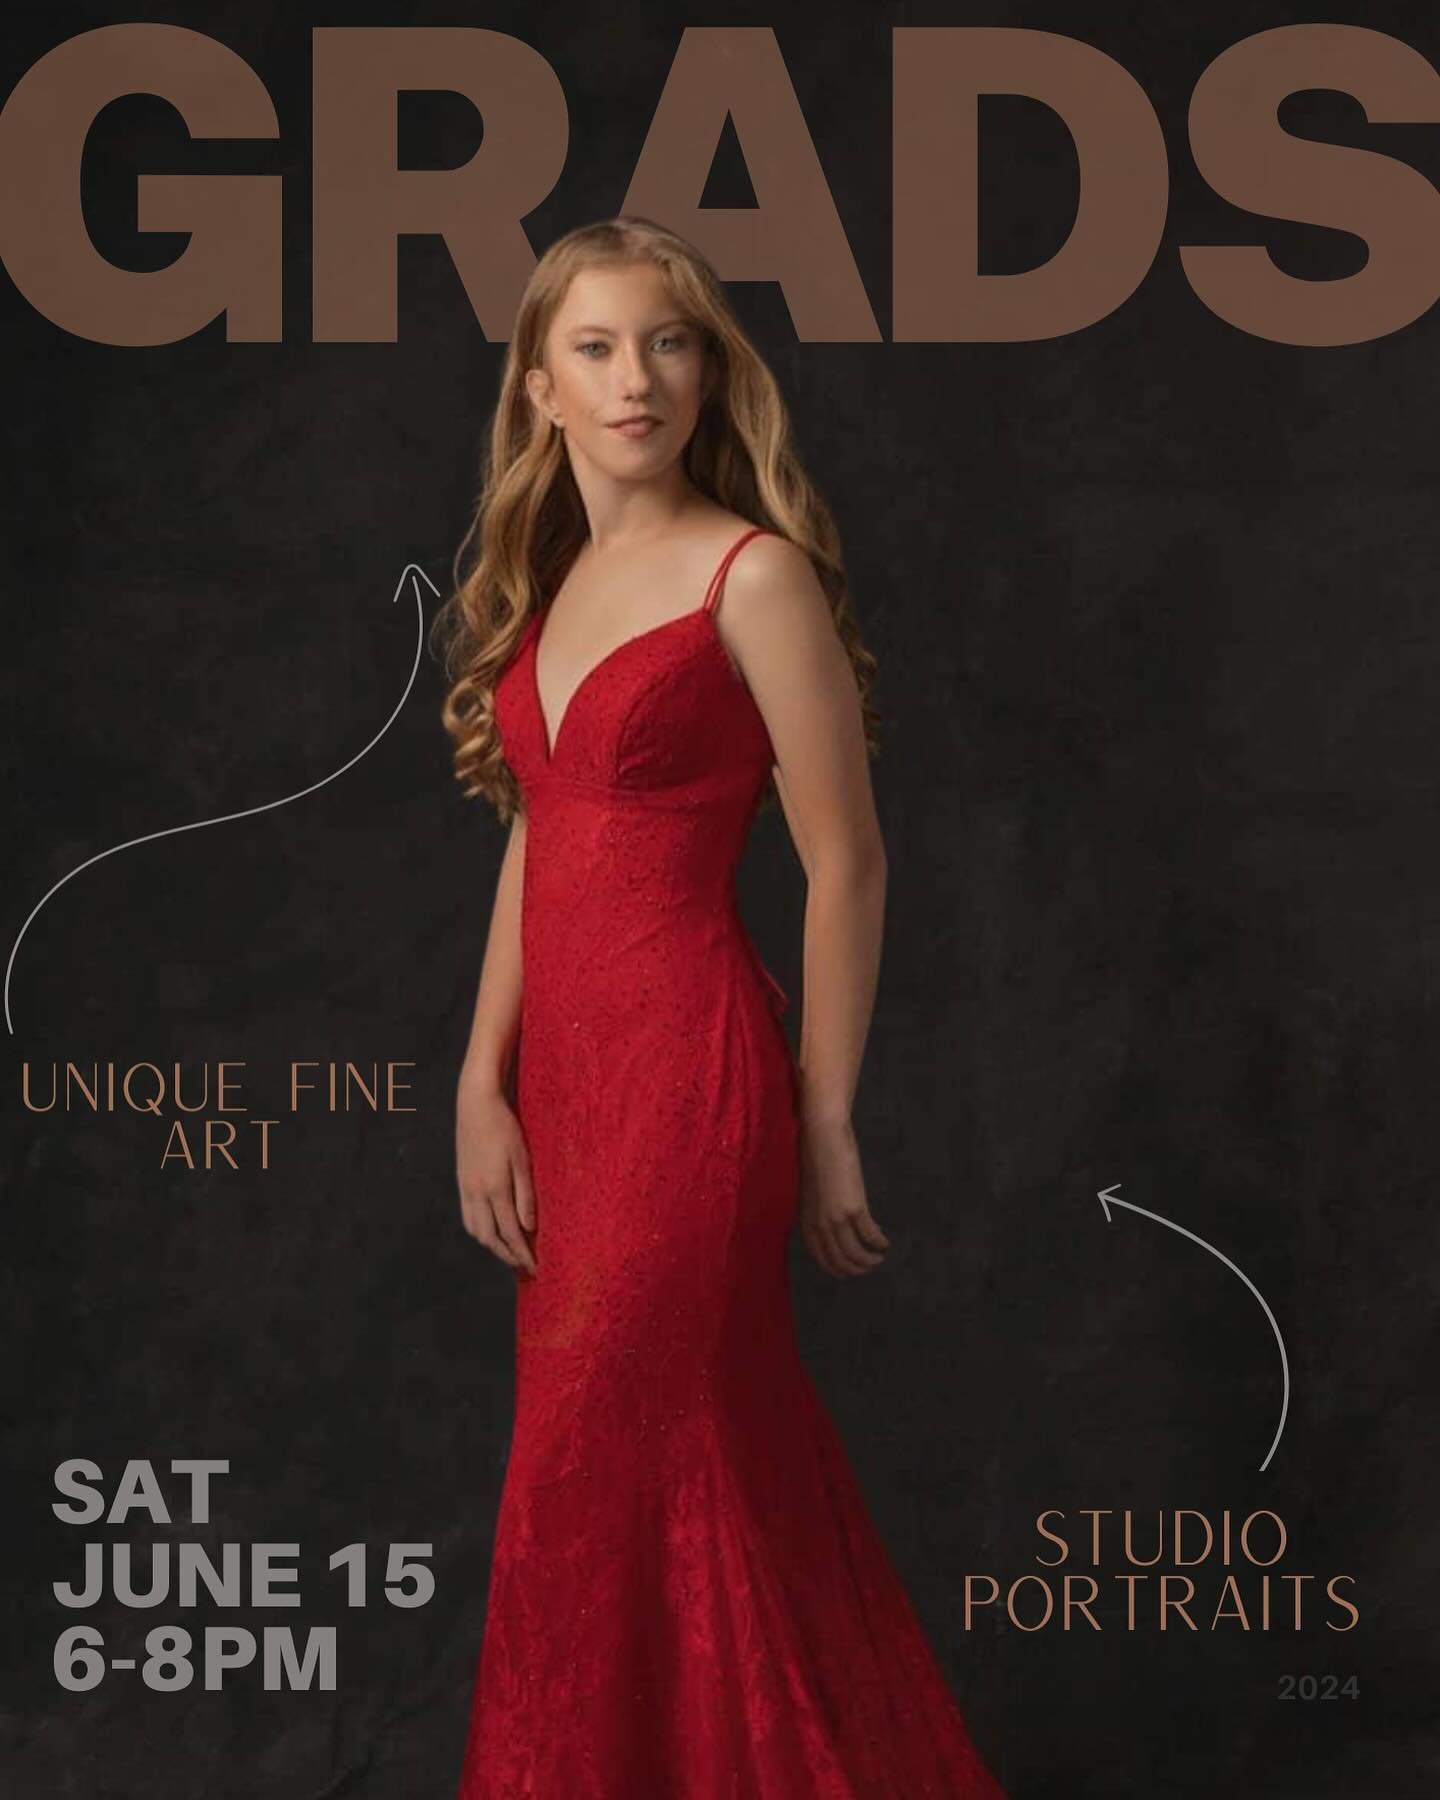 Calling all grads who want some unique fine art images ❤️

Studio drop ins are now available for booking!

✨ Five time slots are available between 6 and 8pm on Saturday June 15✨ 

3 Different packages available with the opportunity to add in your esc